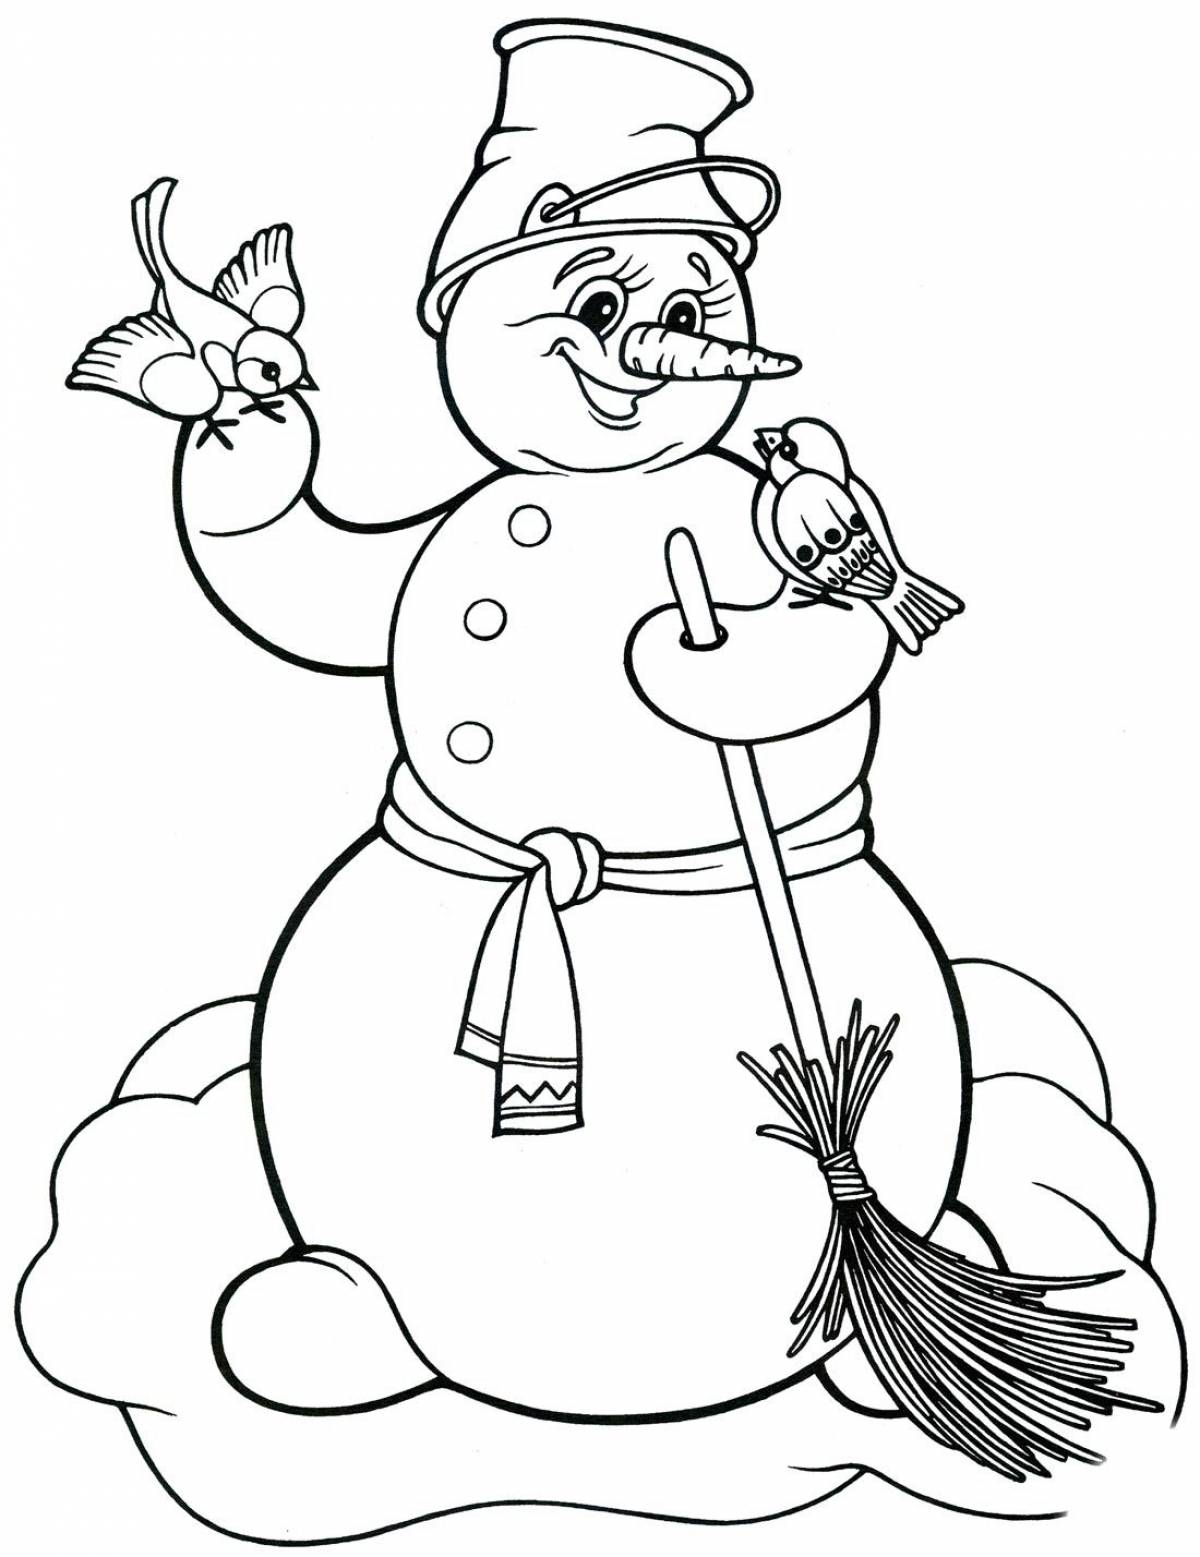 Snowman with bucket